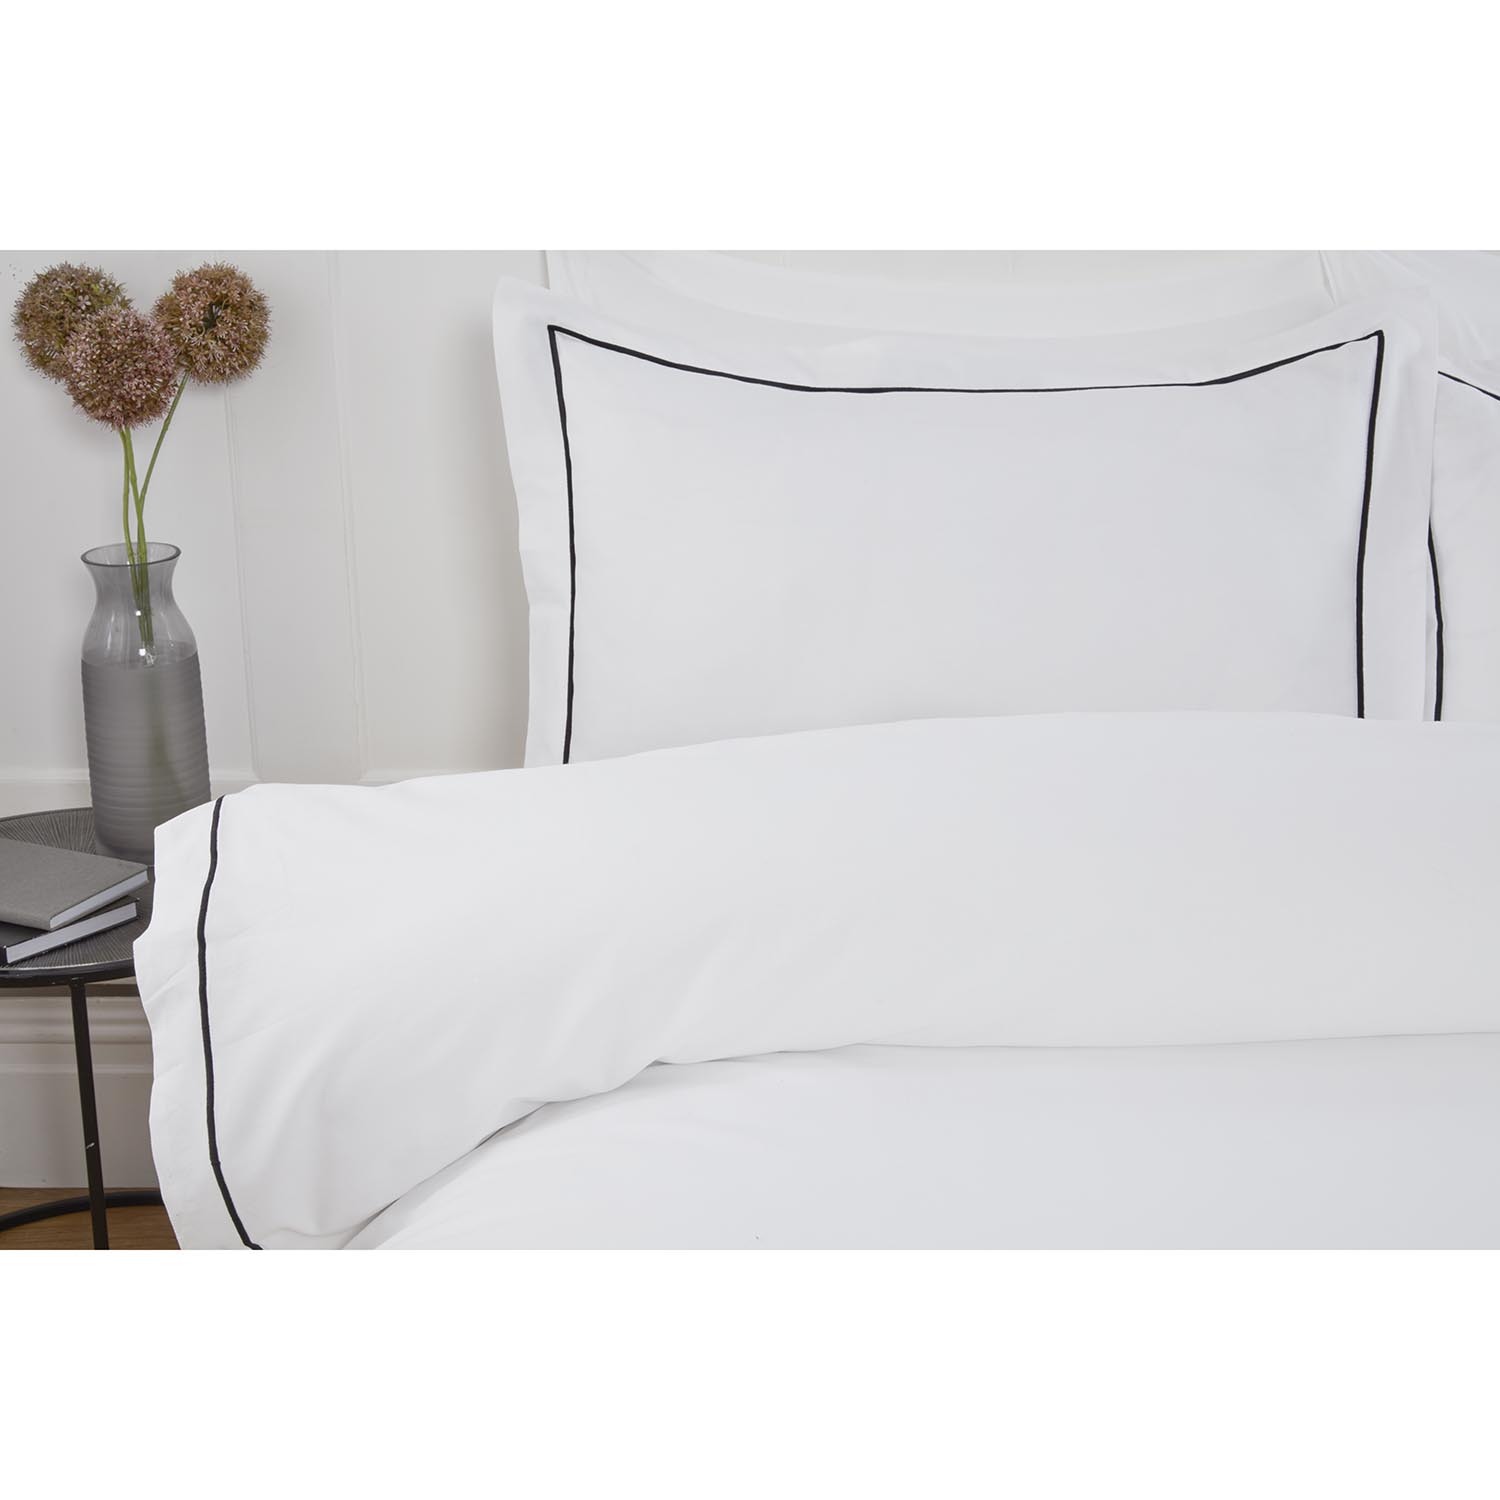 Oxford Bamboo Duvet Cover and Pillowcase Set - White / Superking Image 2